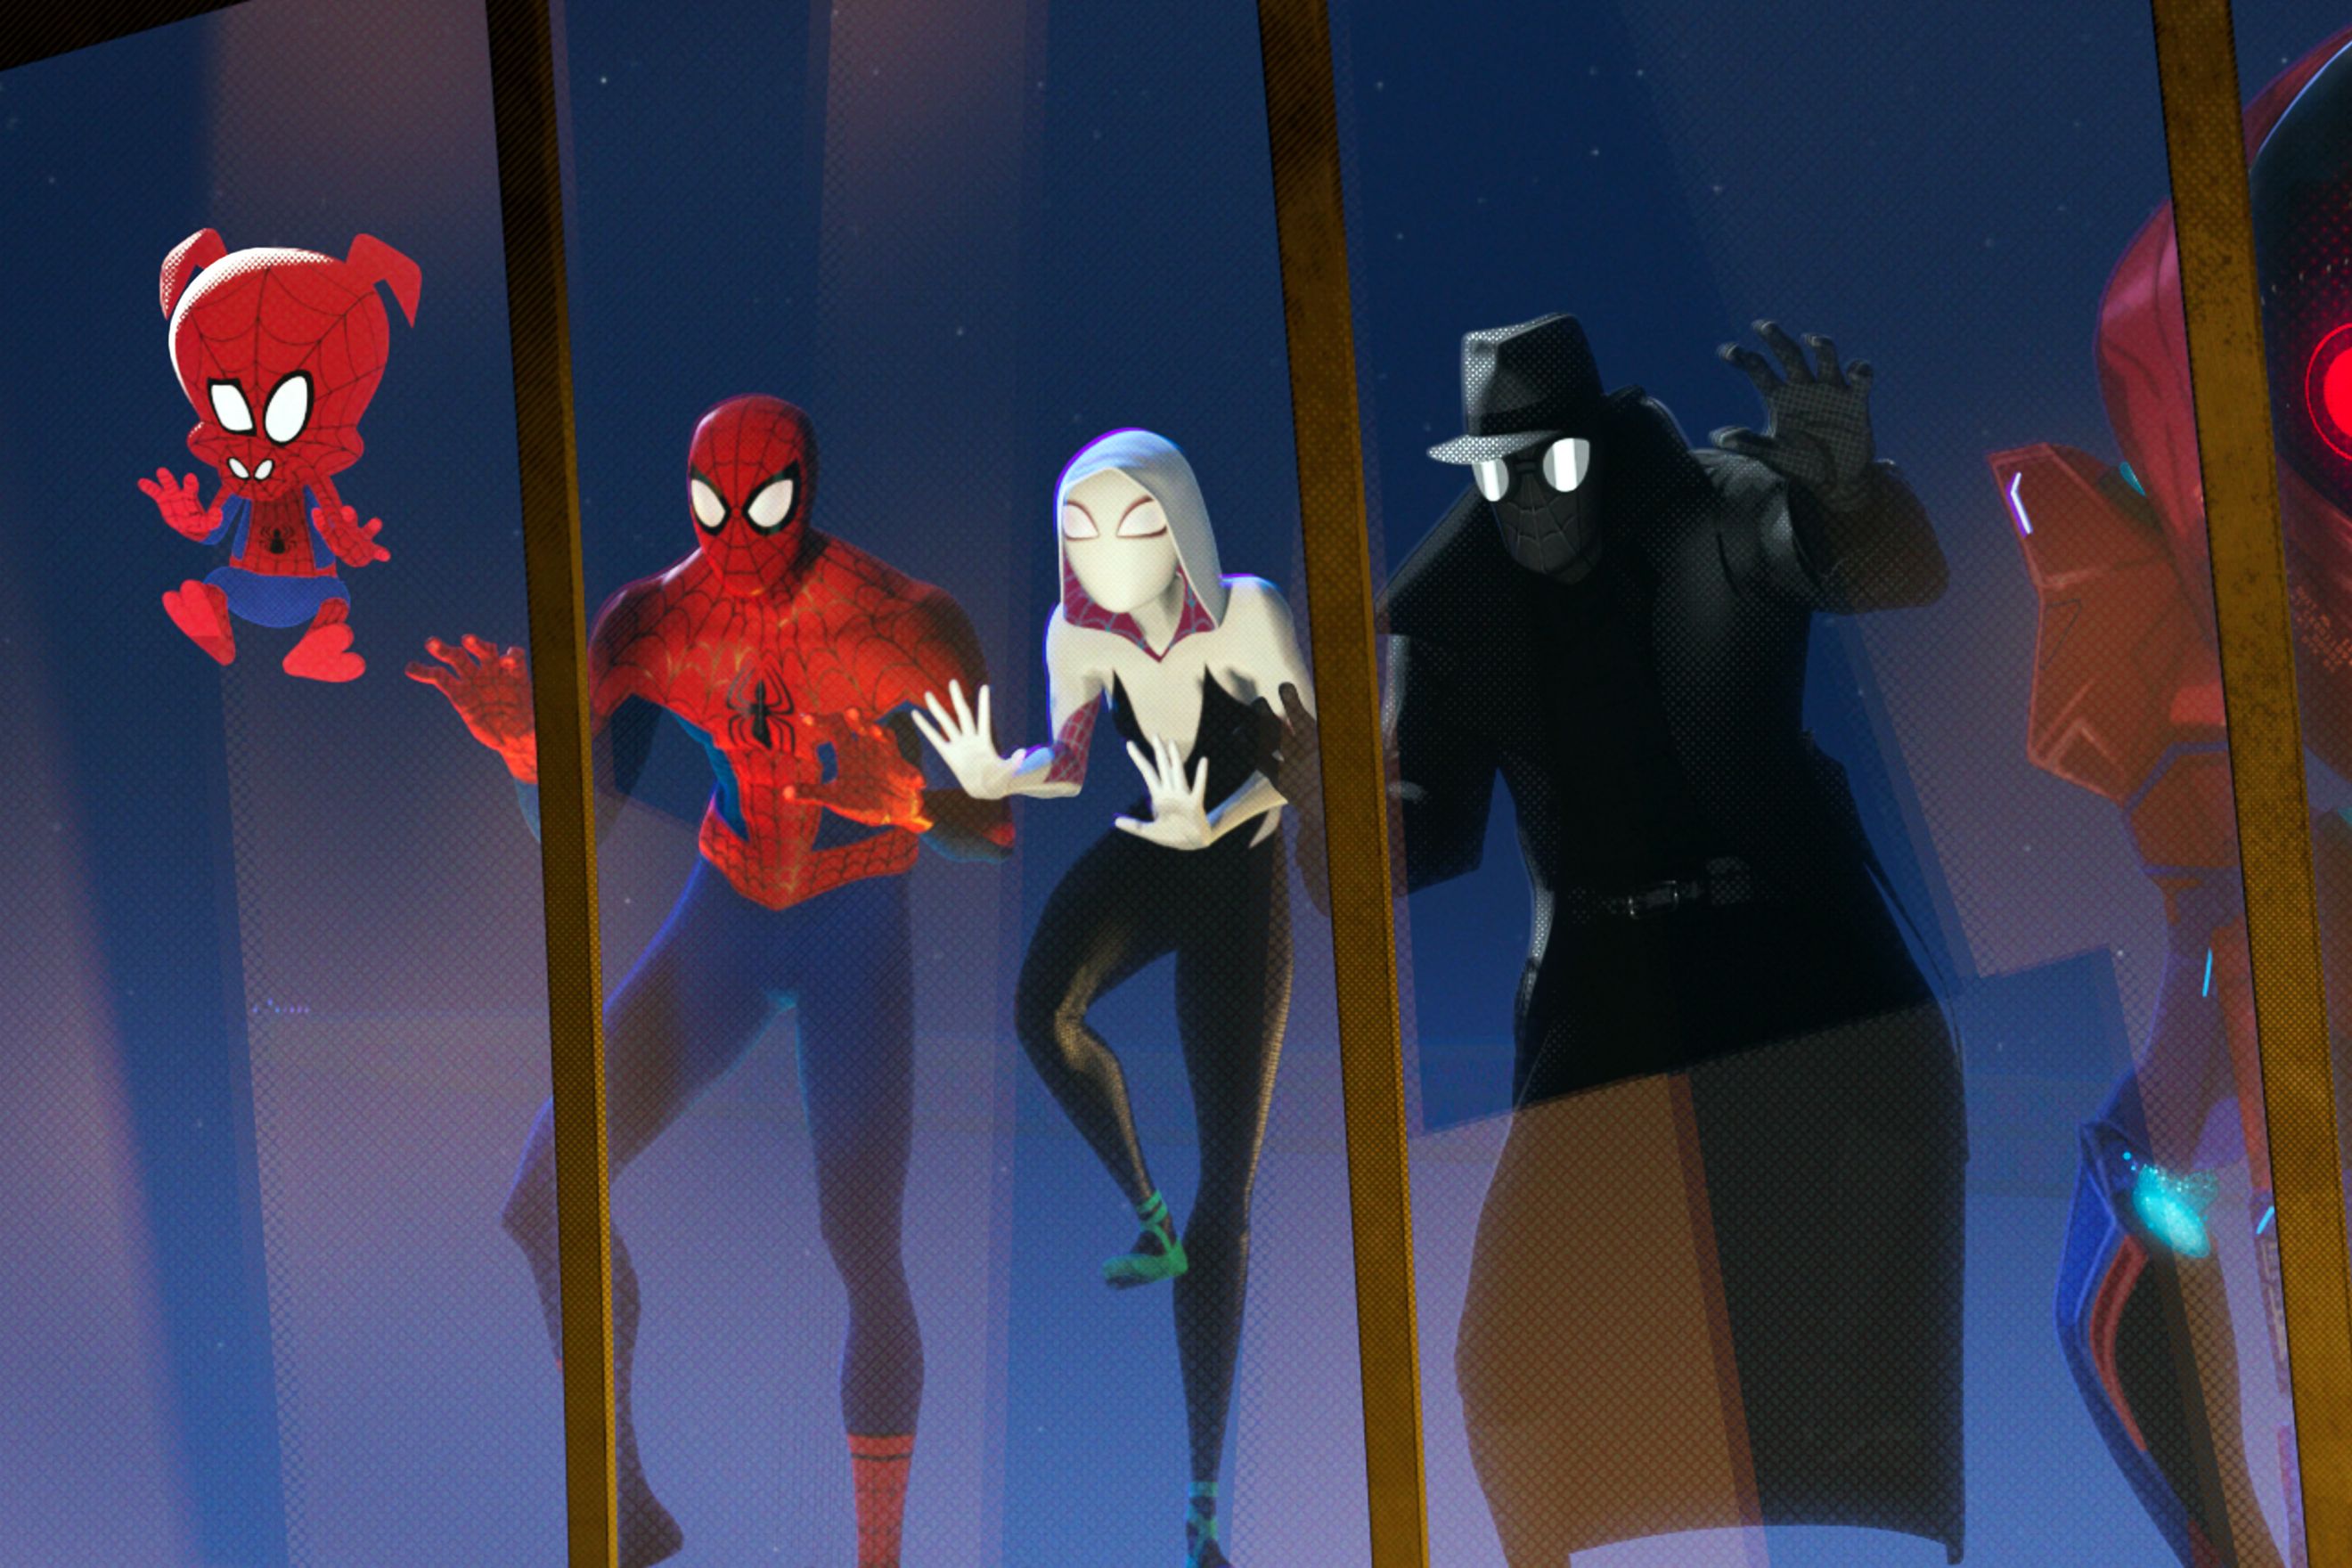 download free across the spider verse